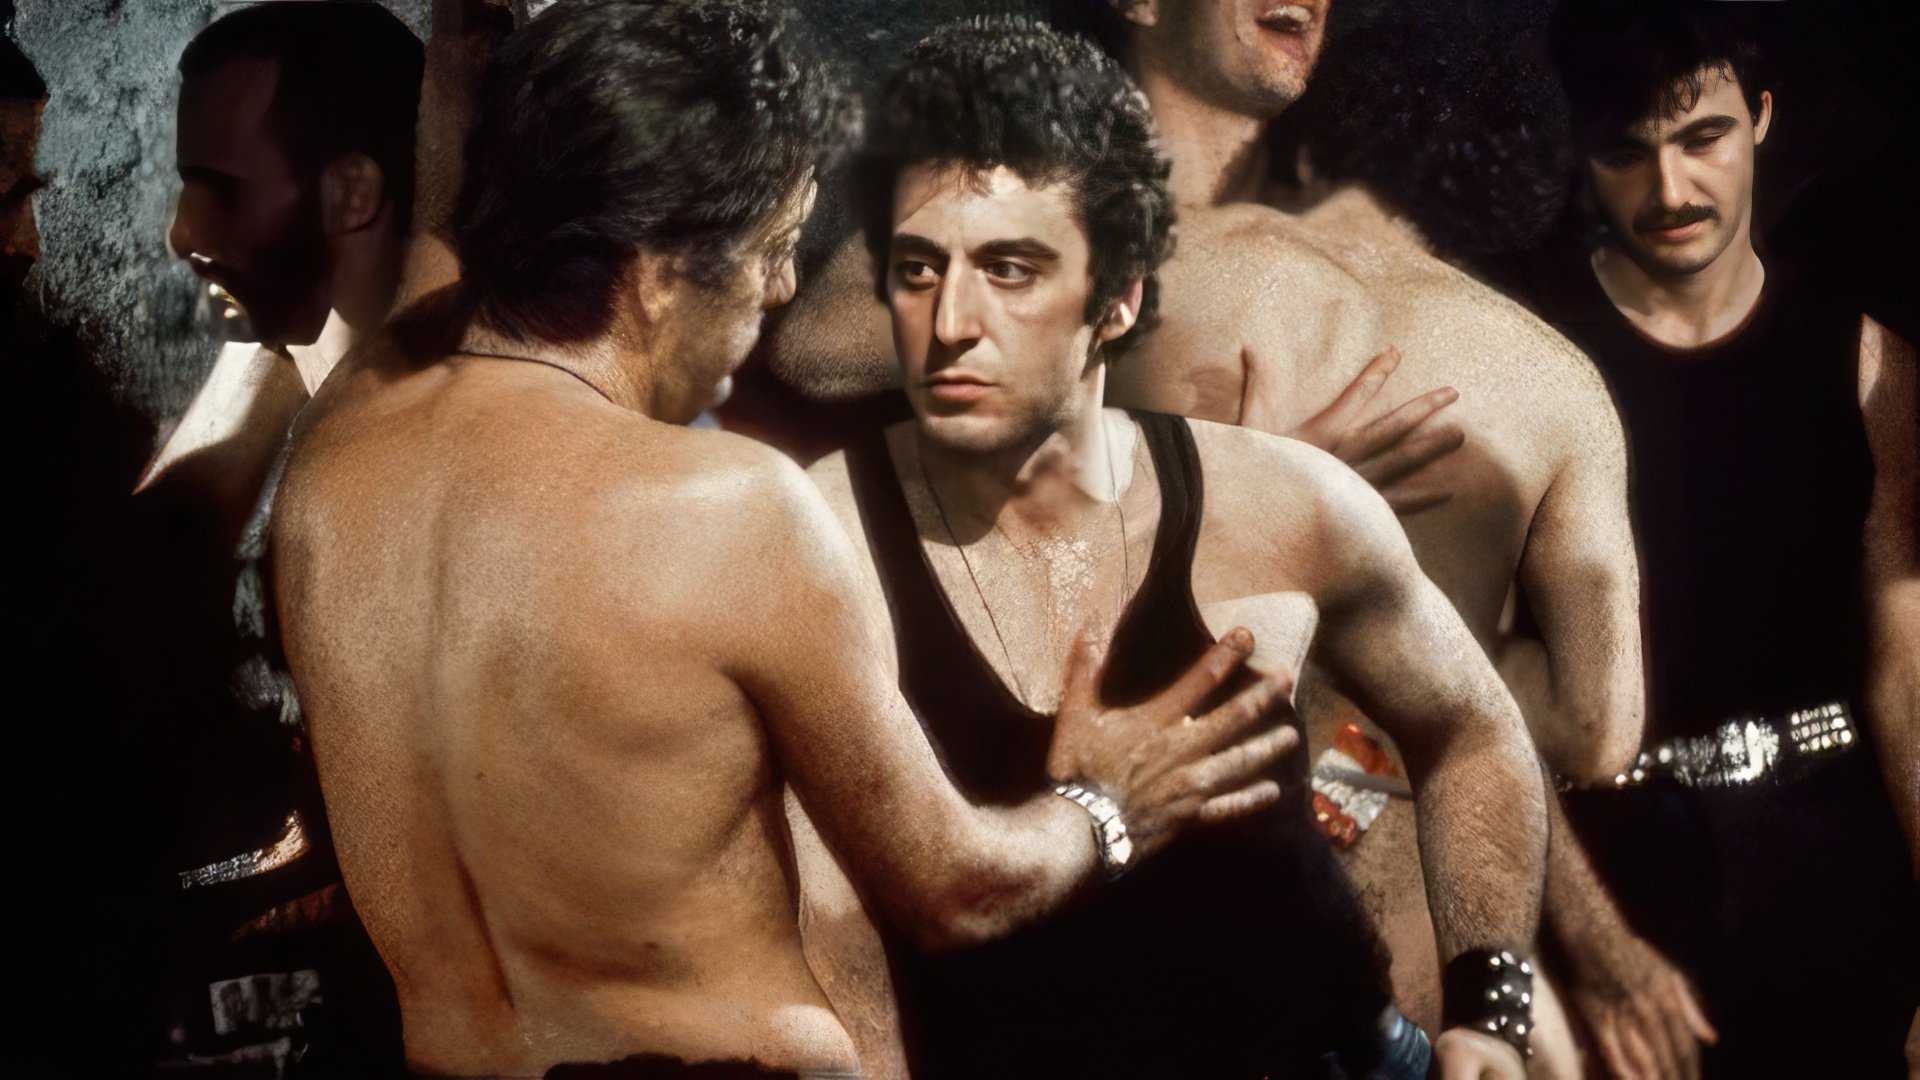 ”Cruising”: Al Pacino’s character pretended to be gay